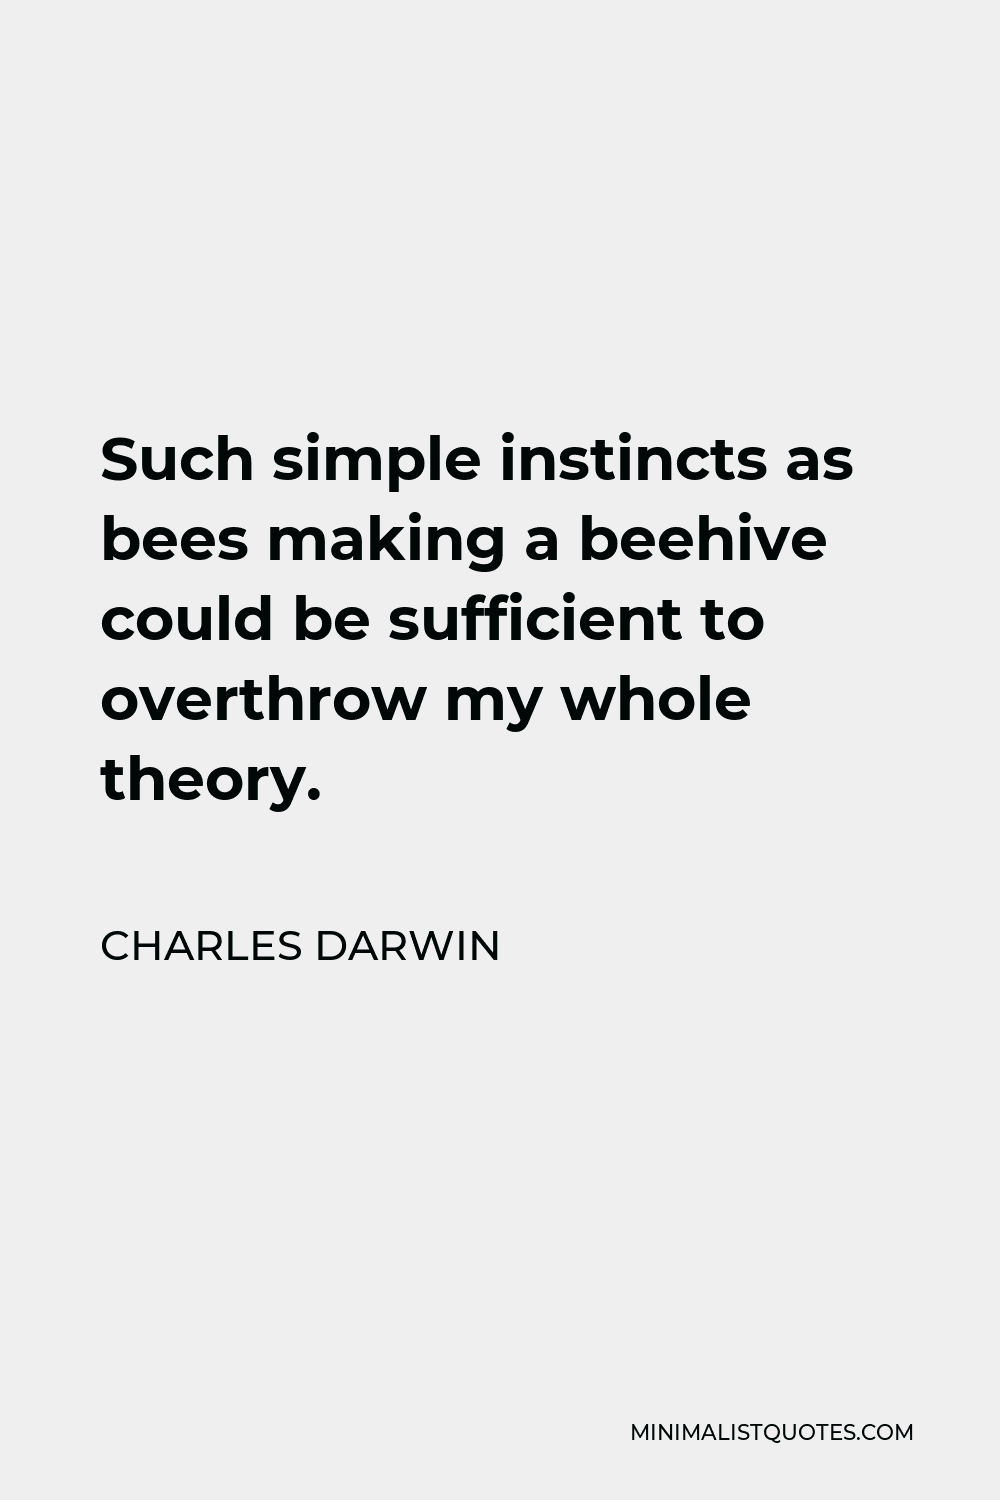 Charles Darwin Quote - Such simple instincts as bees making a beehive could be sufficient to overthrow my whole theory.